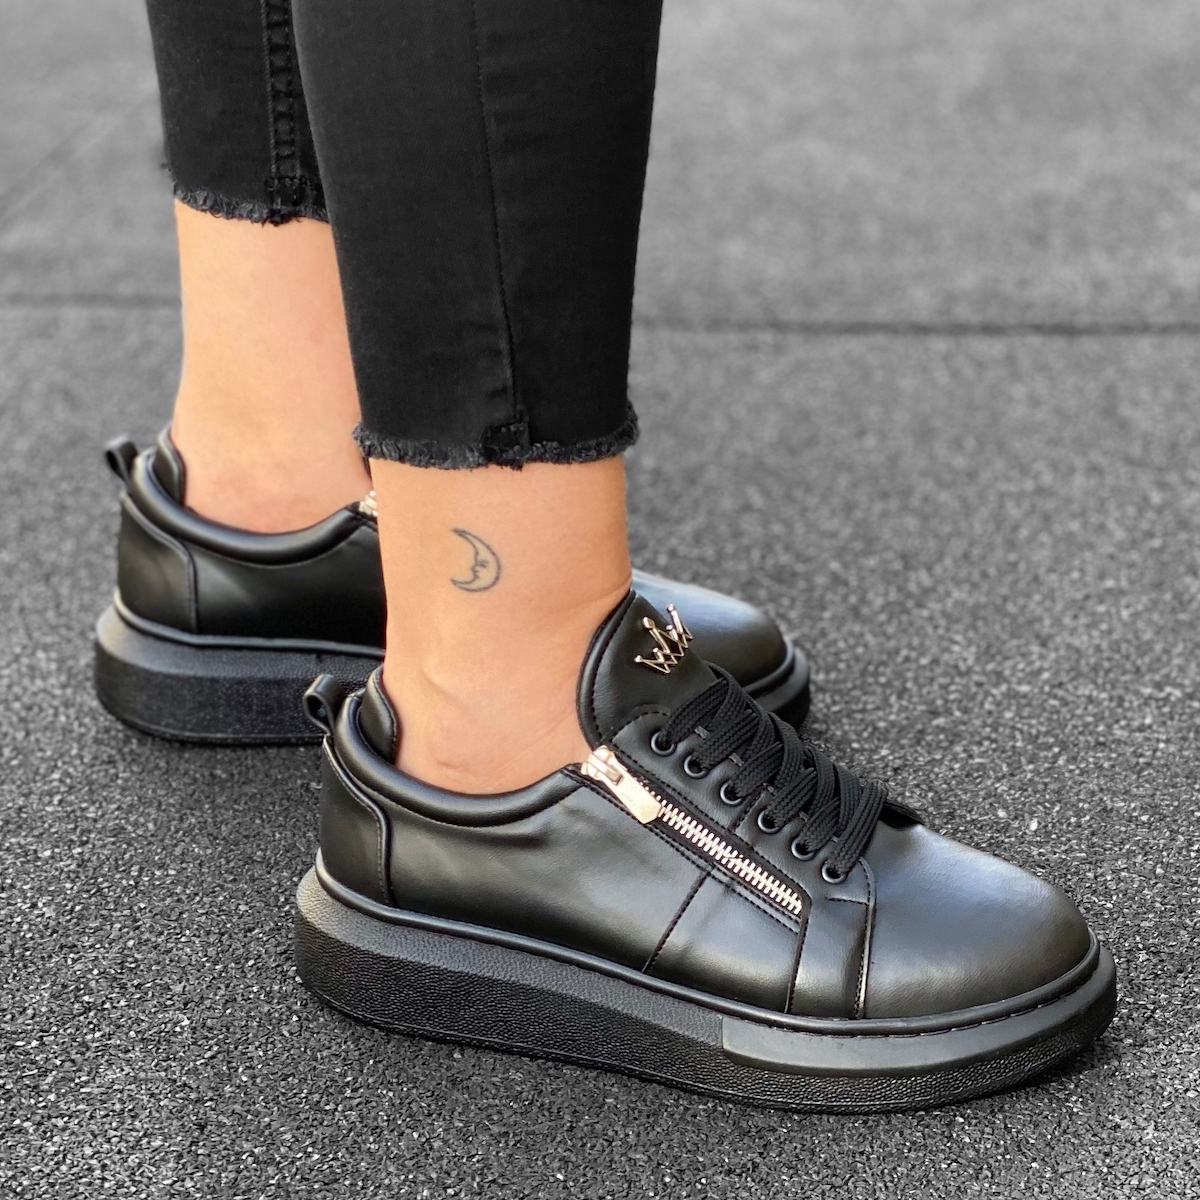 Woman's Hype Sole Zipped Style Sneakers in Black-White